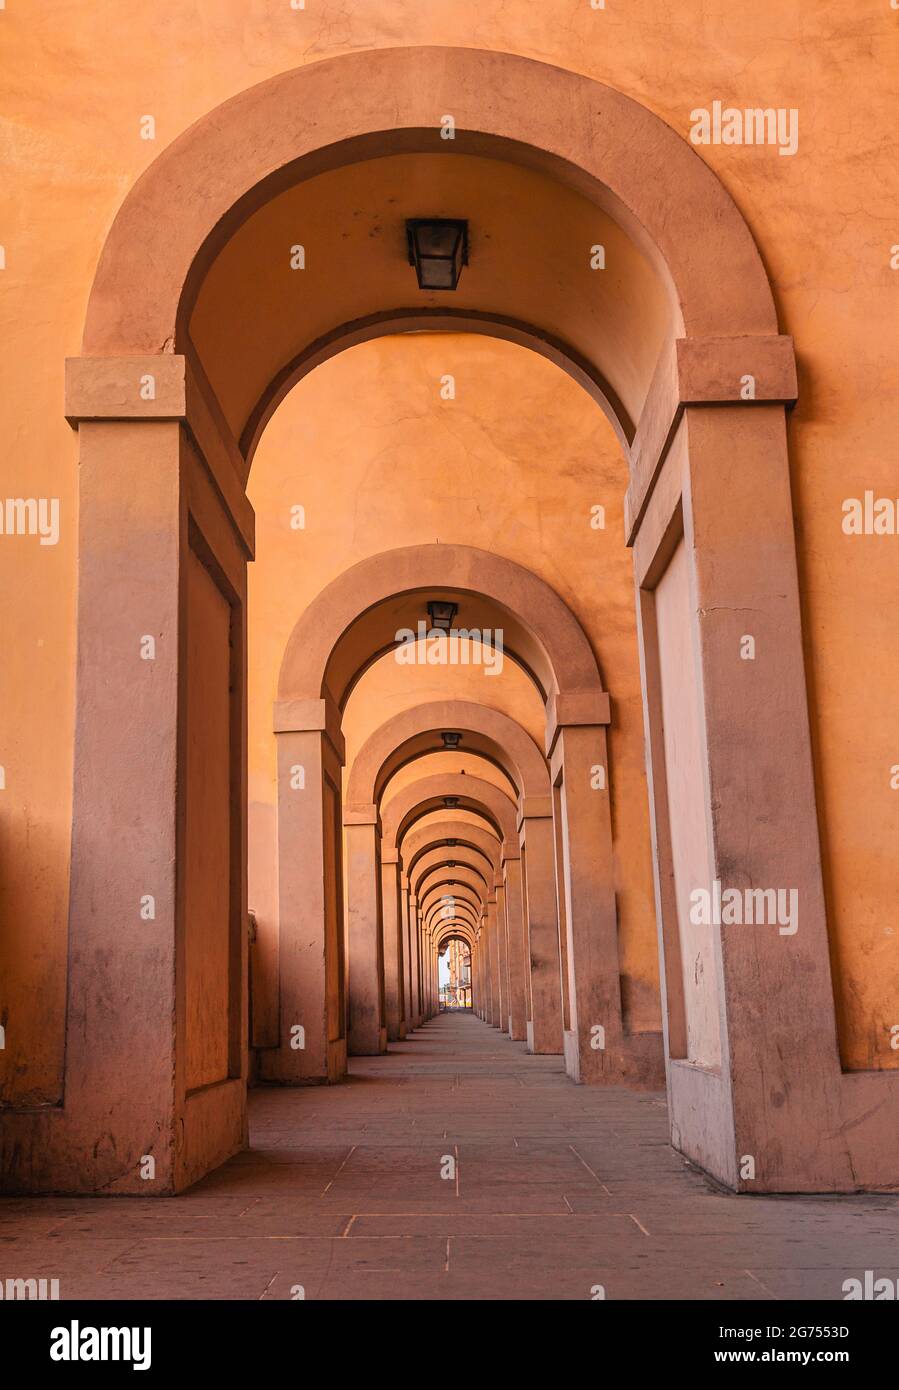 warm colored , orange, yellow. corridor of arches. Clear Architecture background, no people. pleasant colors Stock Photo